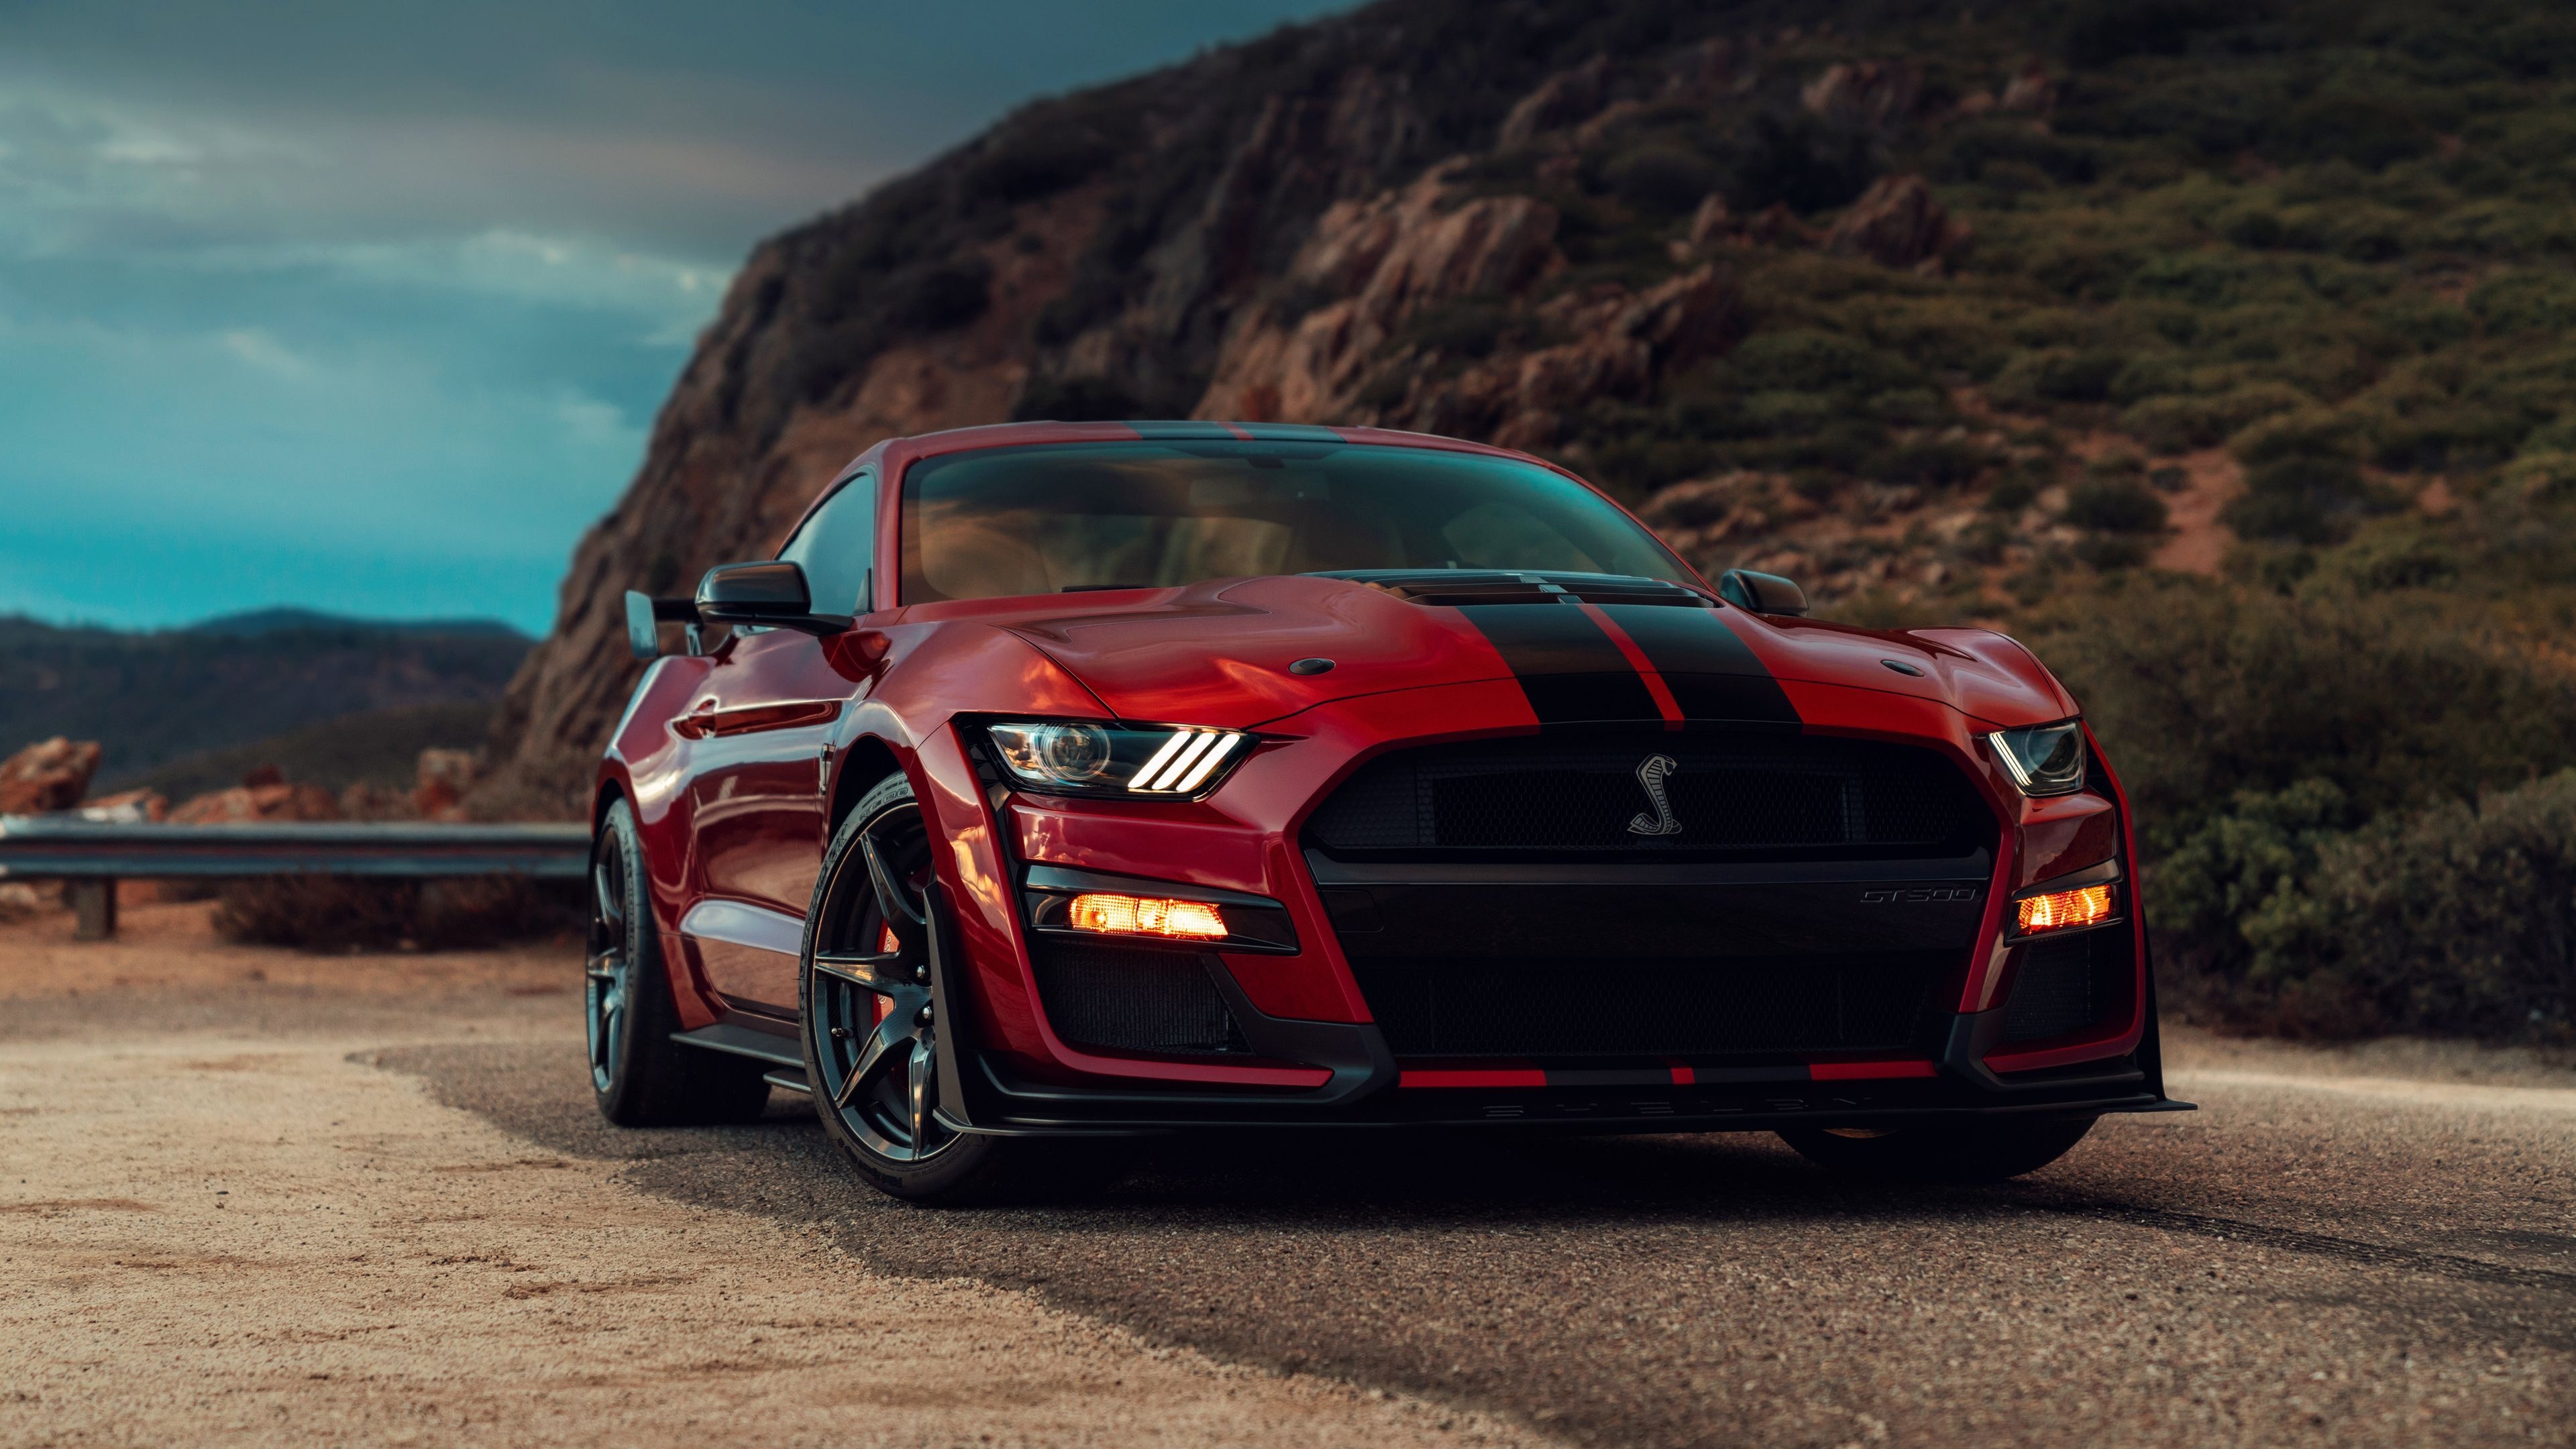 Ford Mustang: A series of American automobiles, Shelby. 3840x2160 4K Wallpaper.